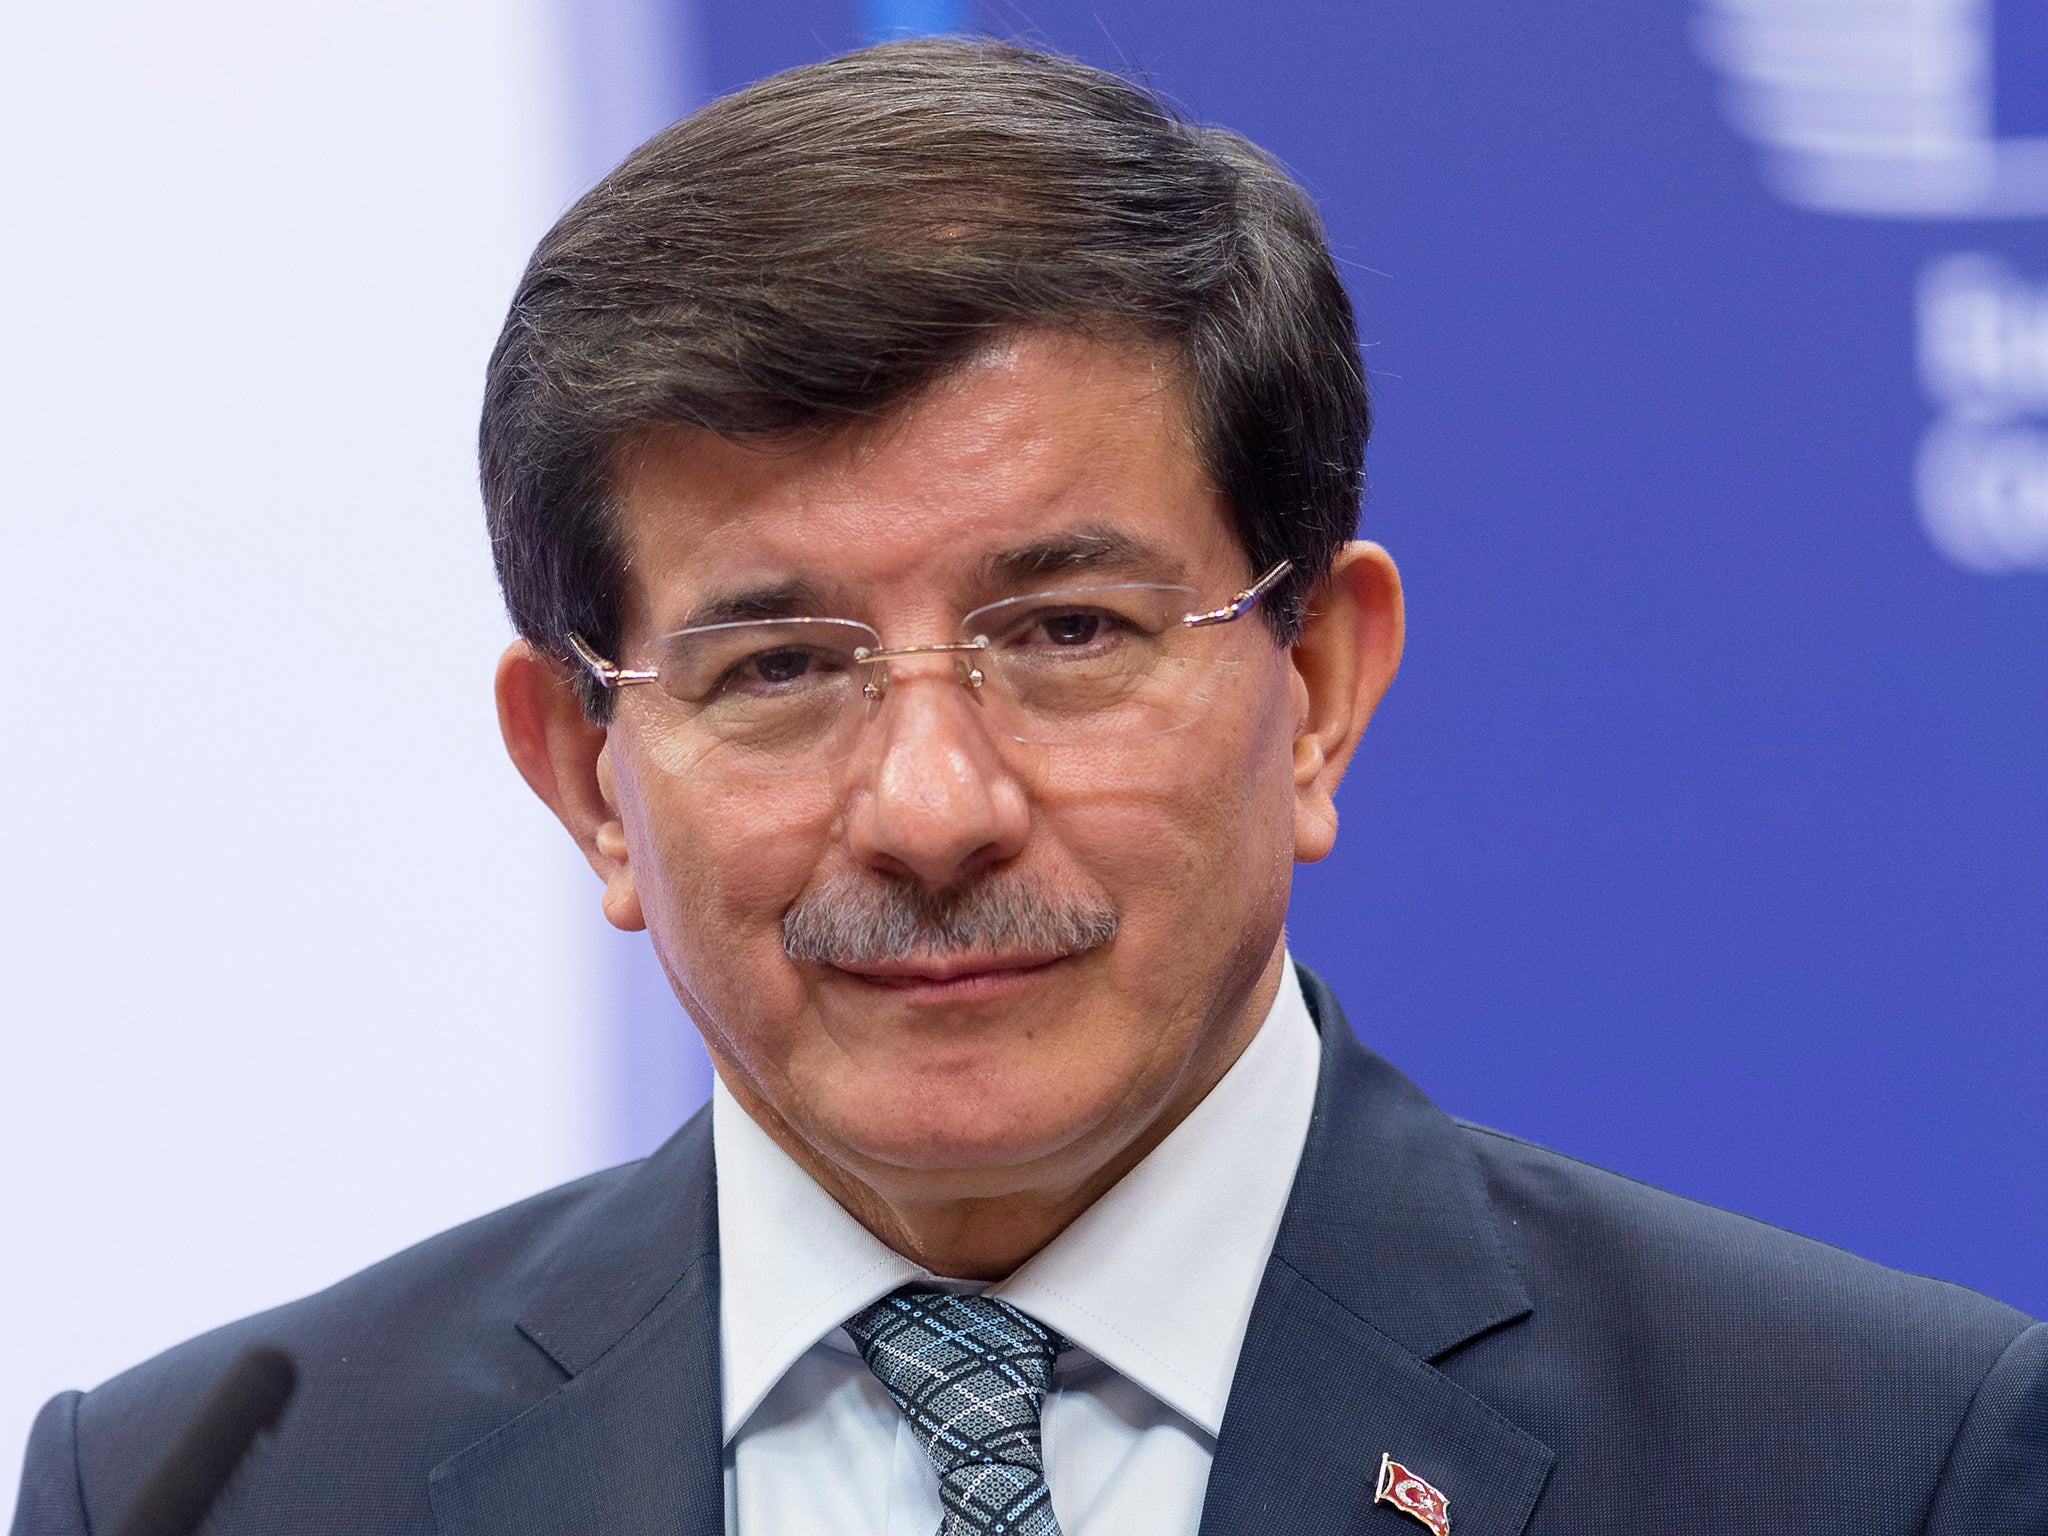 The Turkish prime minister, Ahmet Davutoglu, described those coming under attack as “our Turkmen brothers”